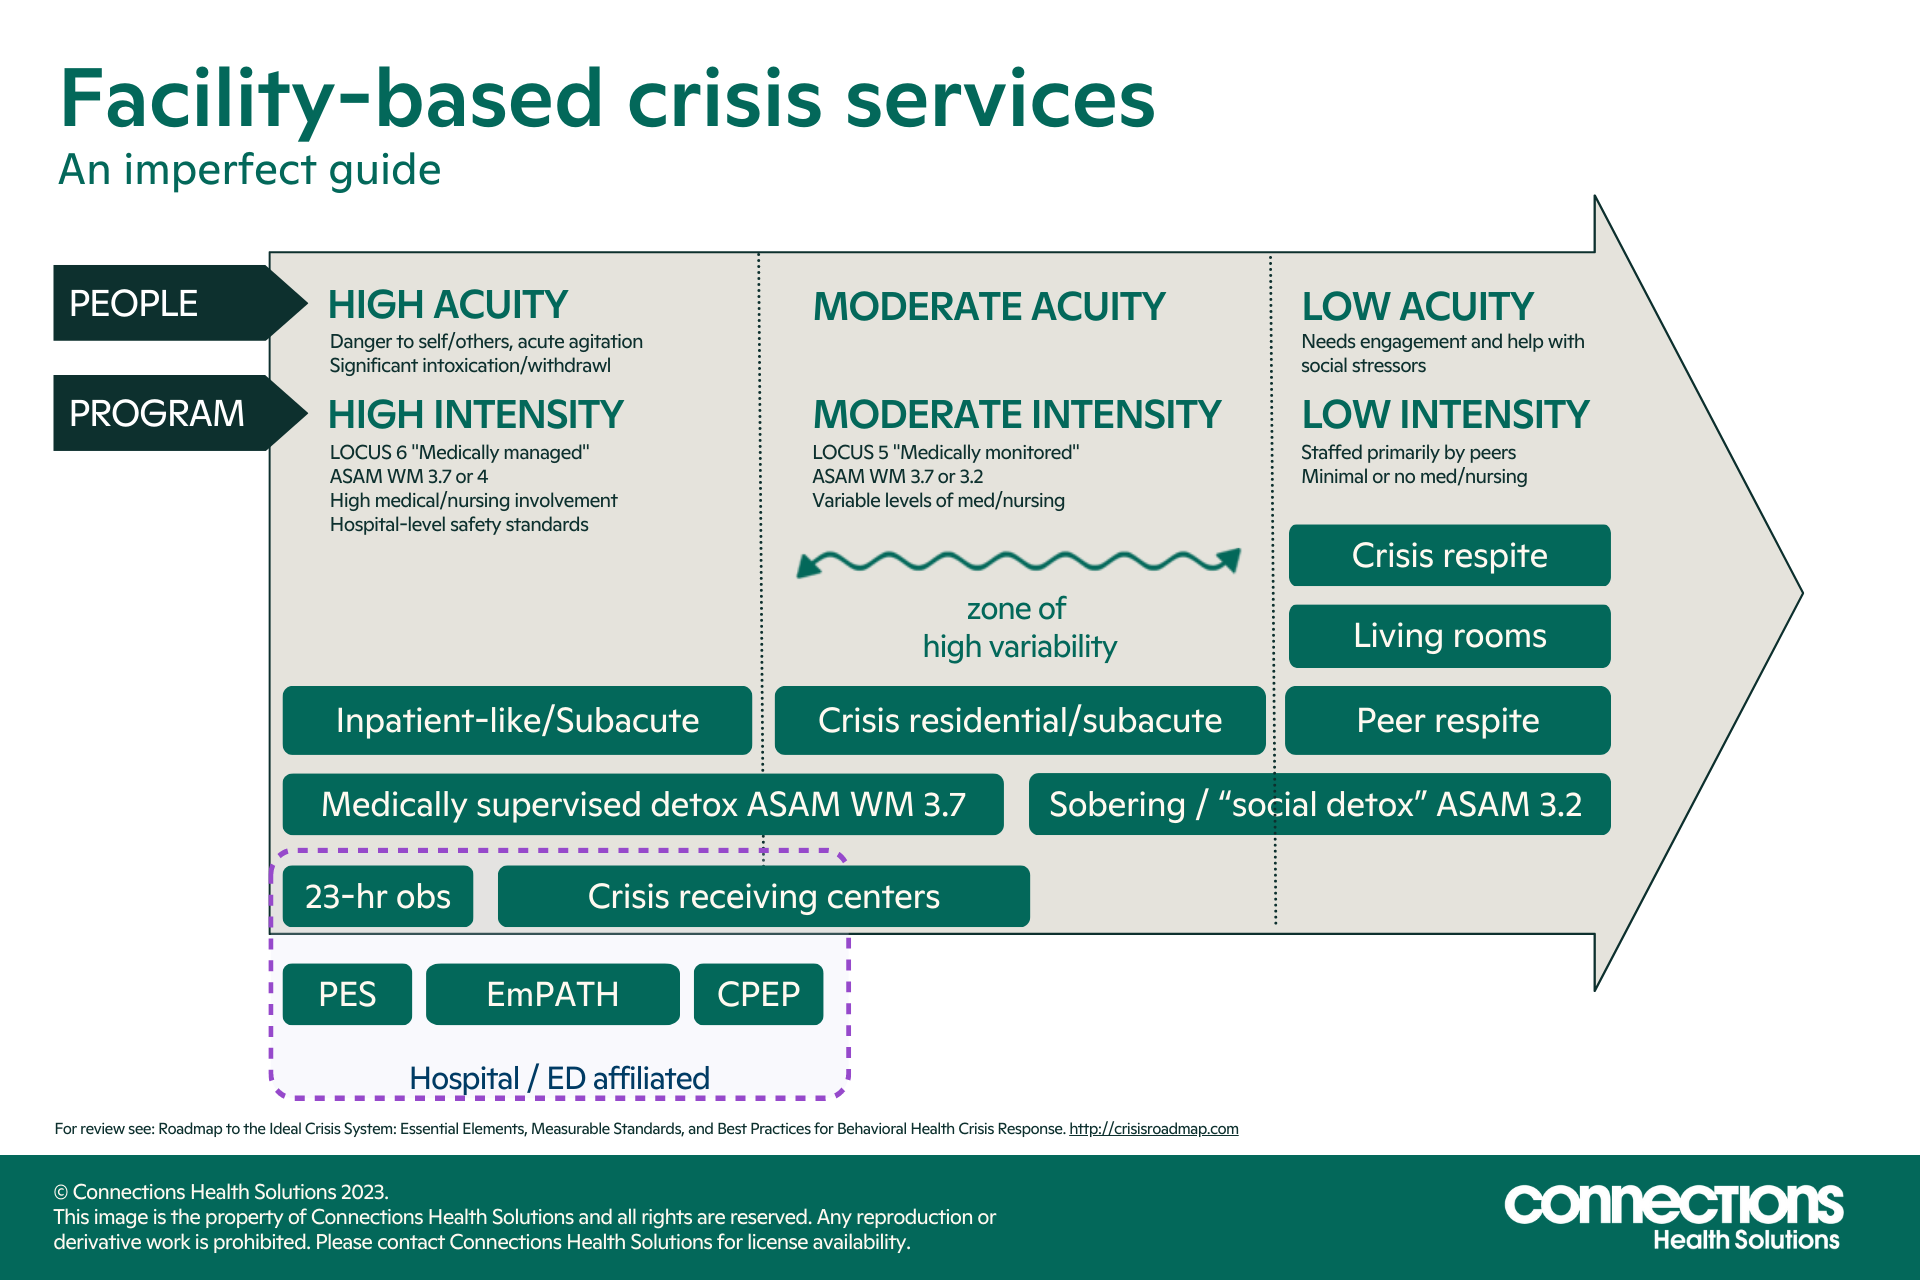 Figure. An Imperfect Guide to Facility-Based Crisis Services